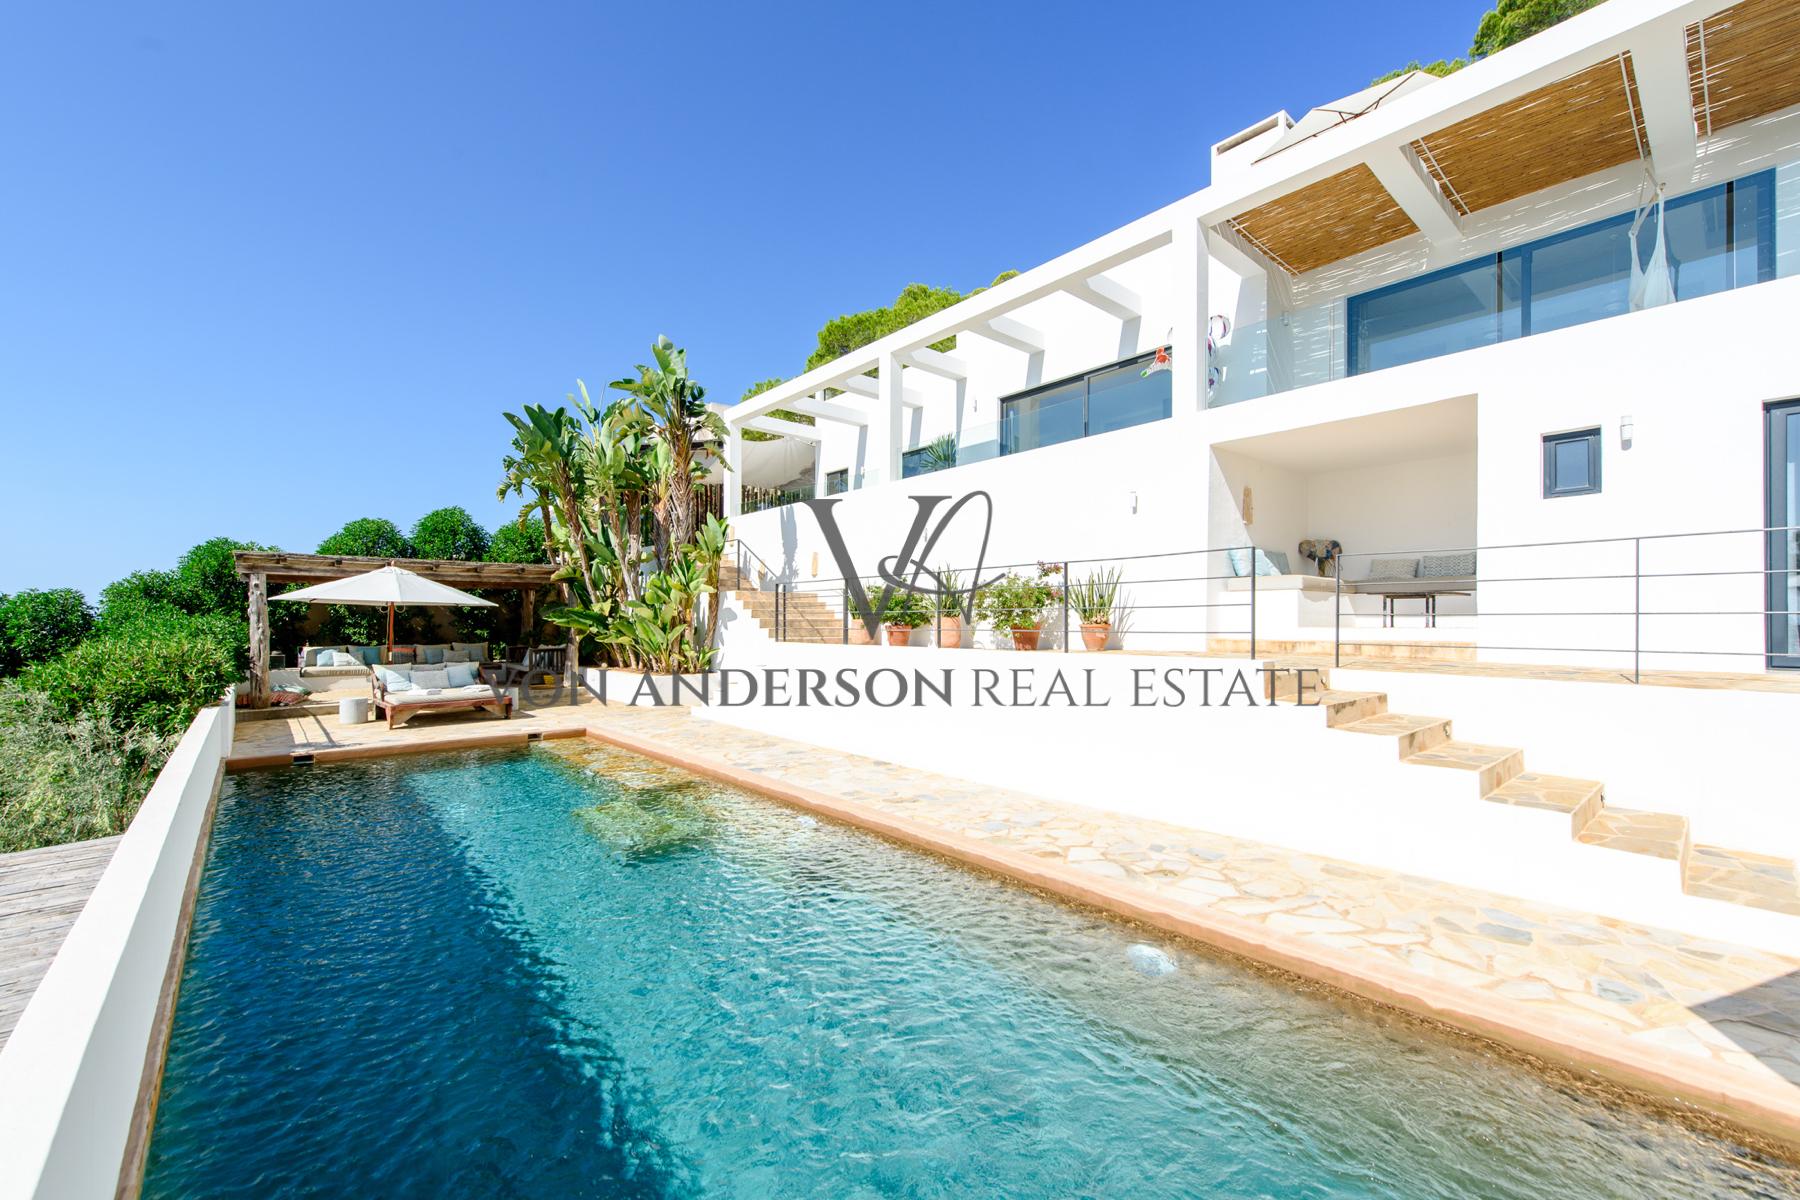 Imposing Modern Villa with Stunning Ocean Views Situated in Es Cubells, ref. VA1048, for sale in Ibiza by Von Anderson Real Estate